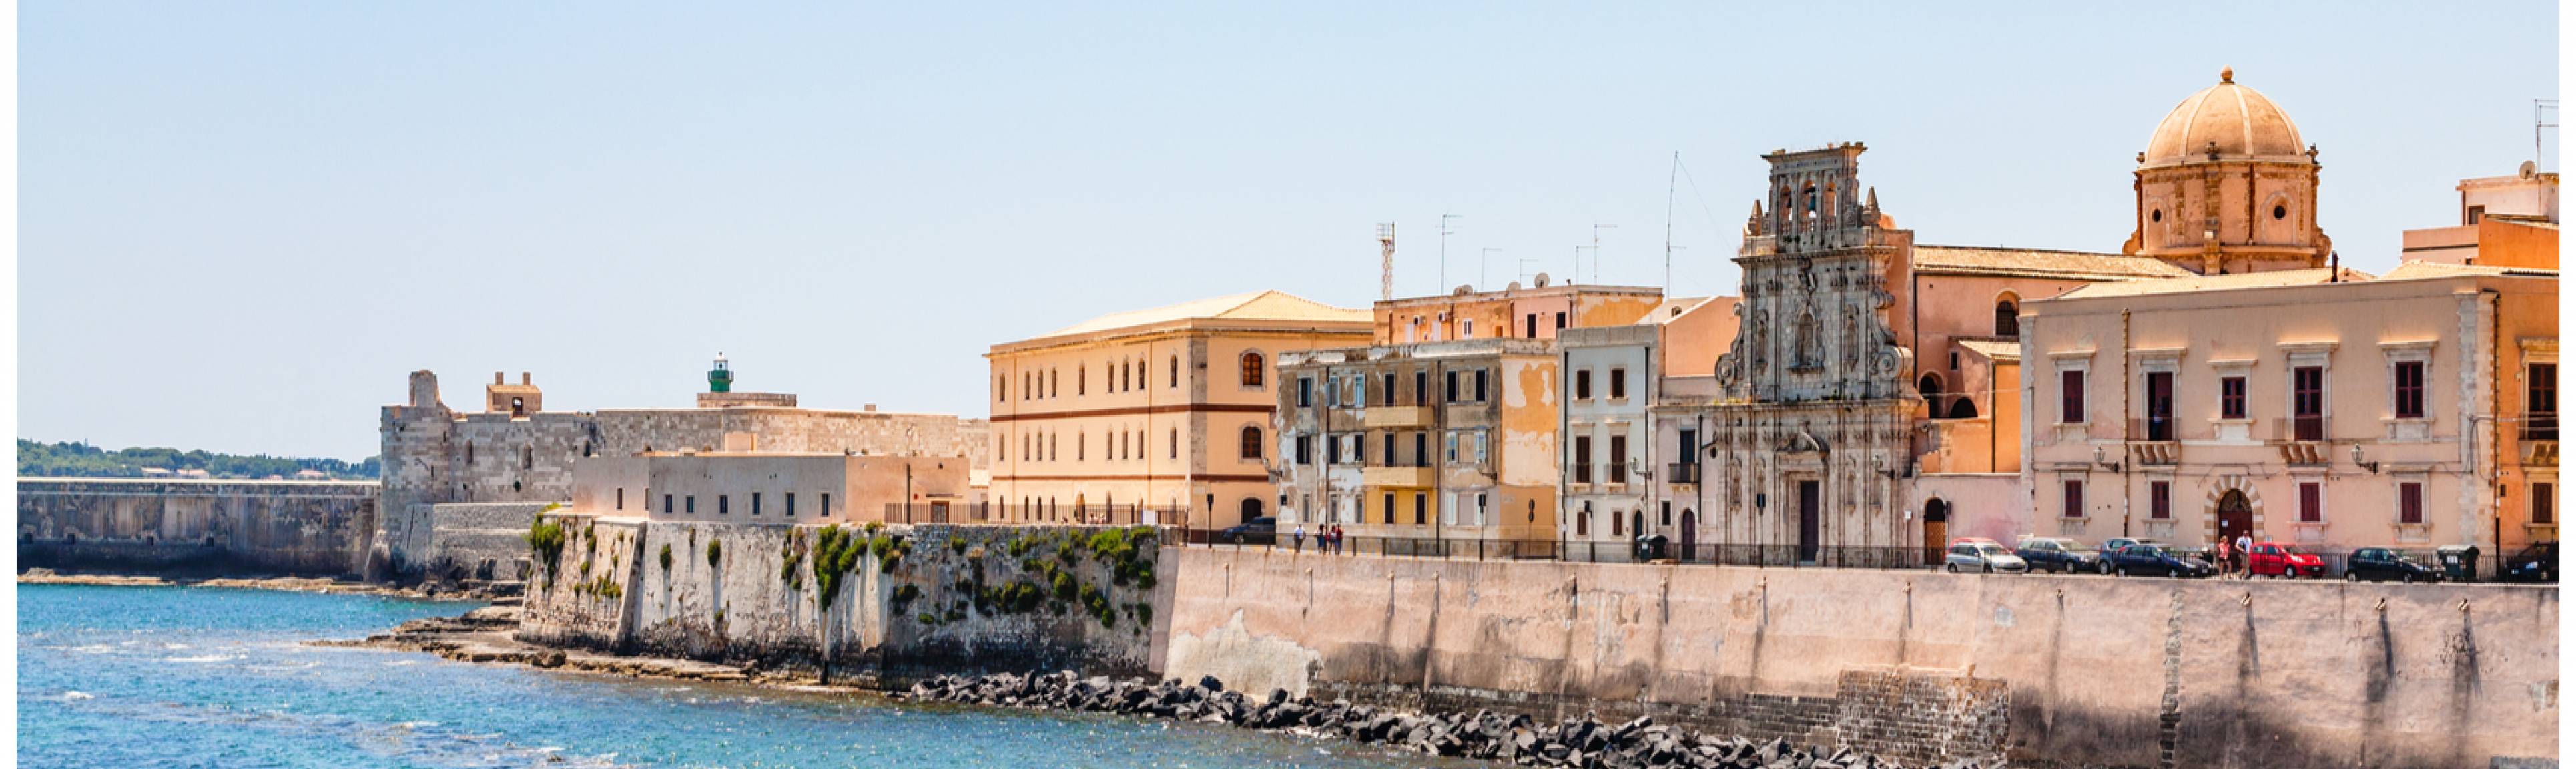 View from the water of Syracuse in Sicily